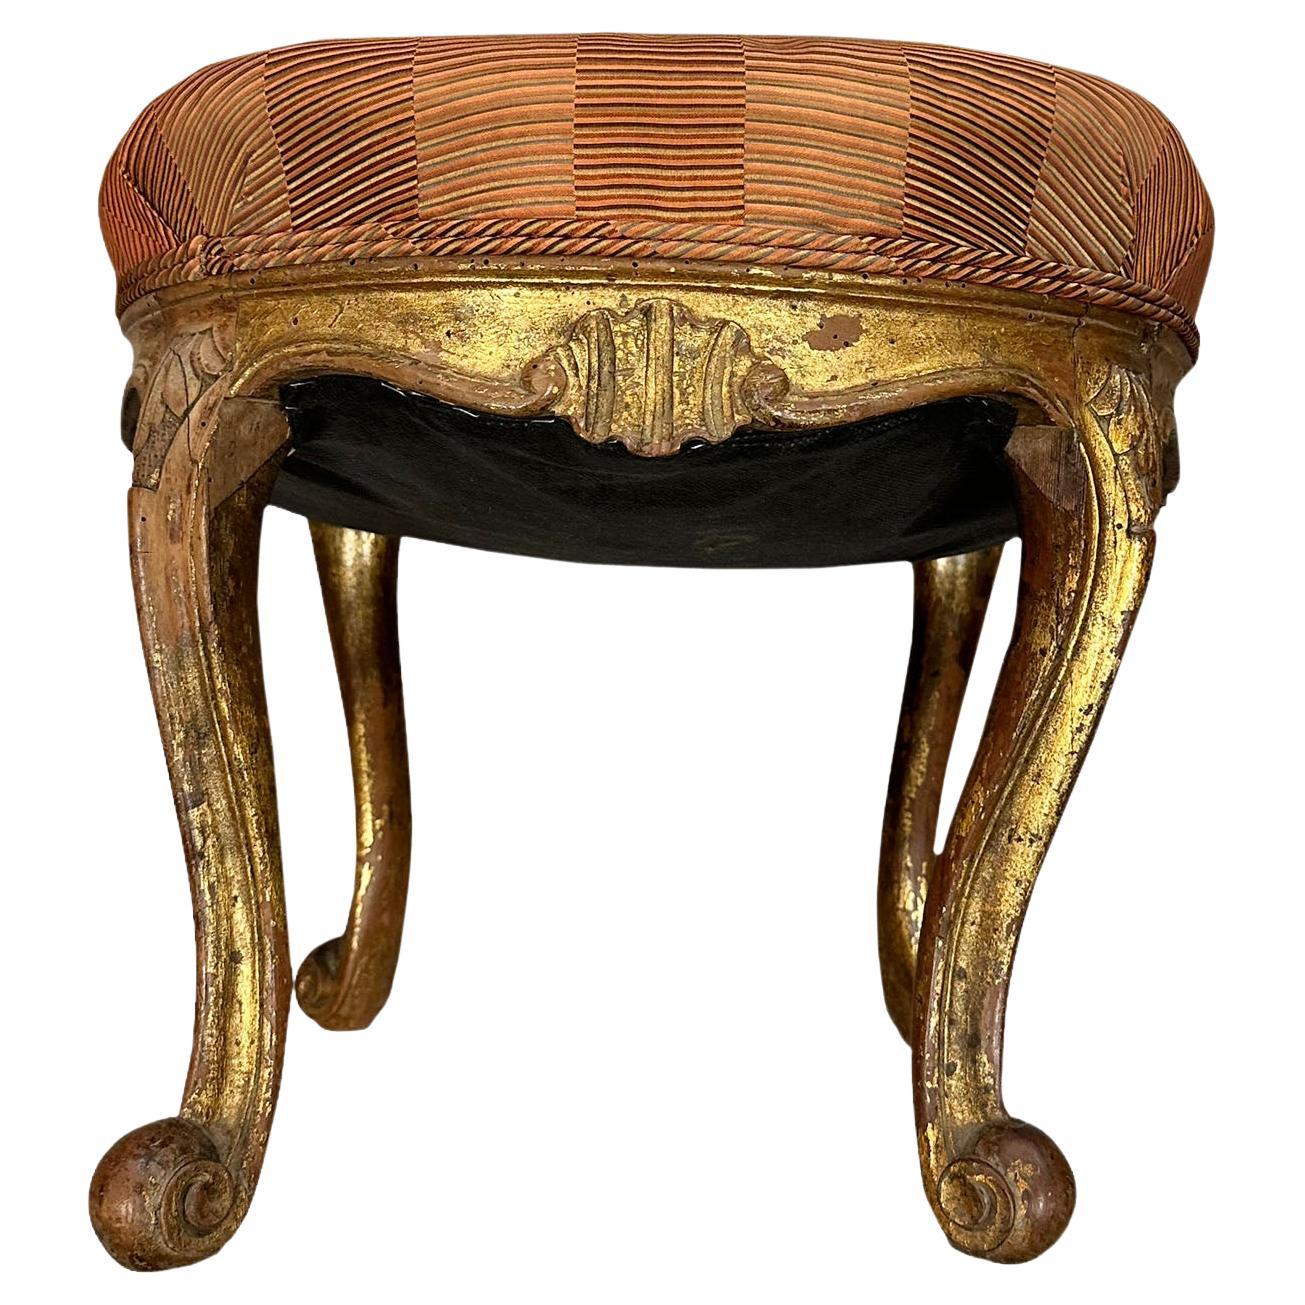 A 19th century, Italian Venetian stool, gilded throughout with a lot of patina the fabric is silk. The bench is all hand carved and the legs go into a swirl at the bottom.